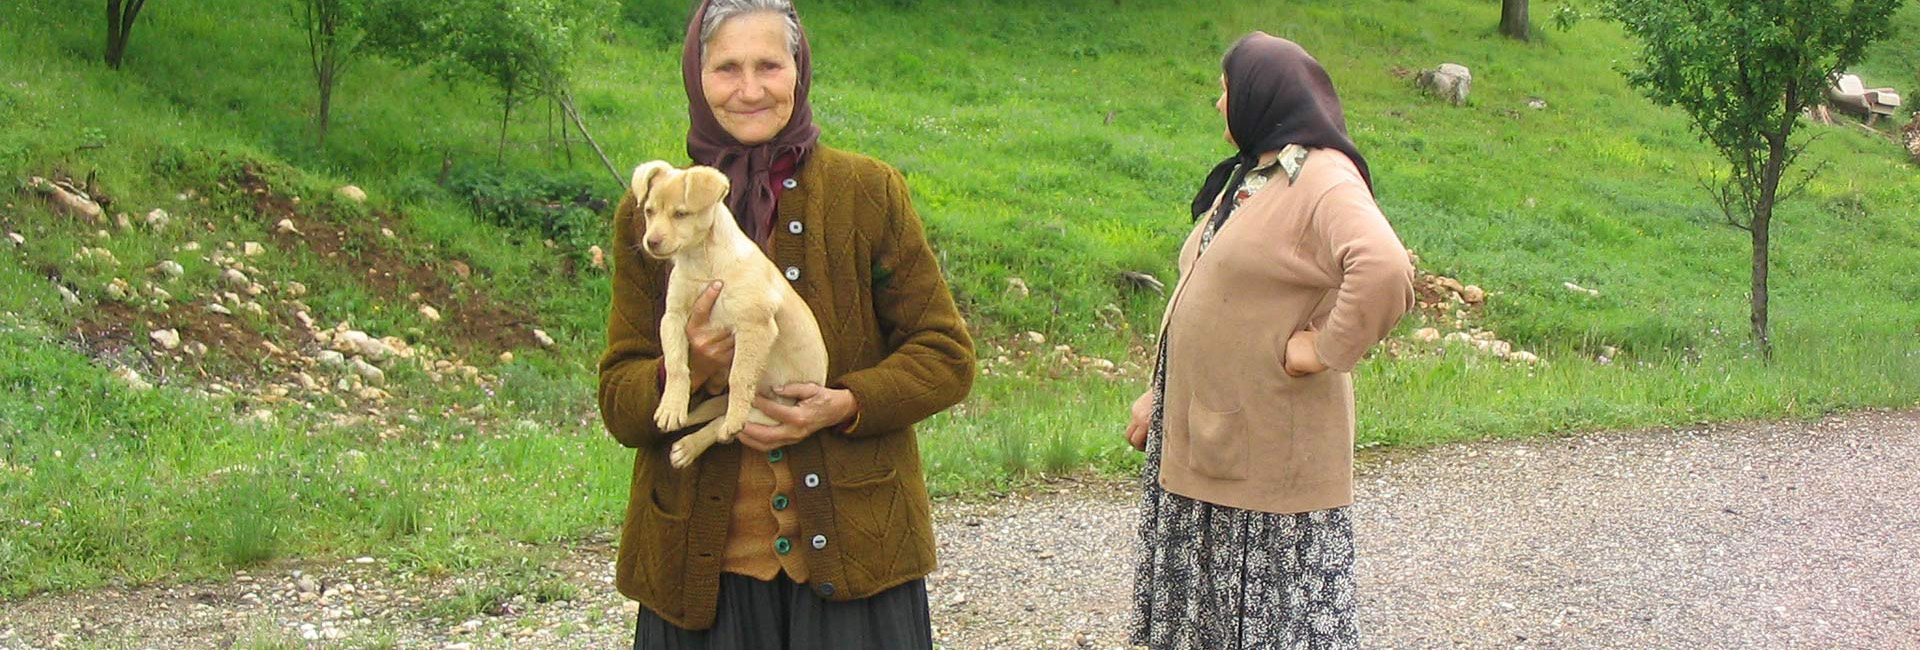 Walking Serbia guided holiday - Meet the locals